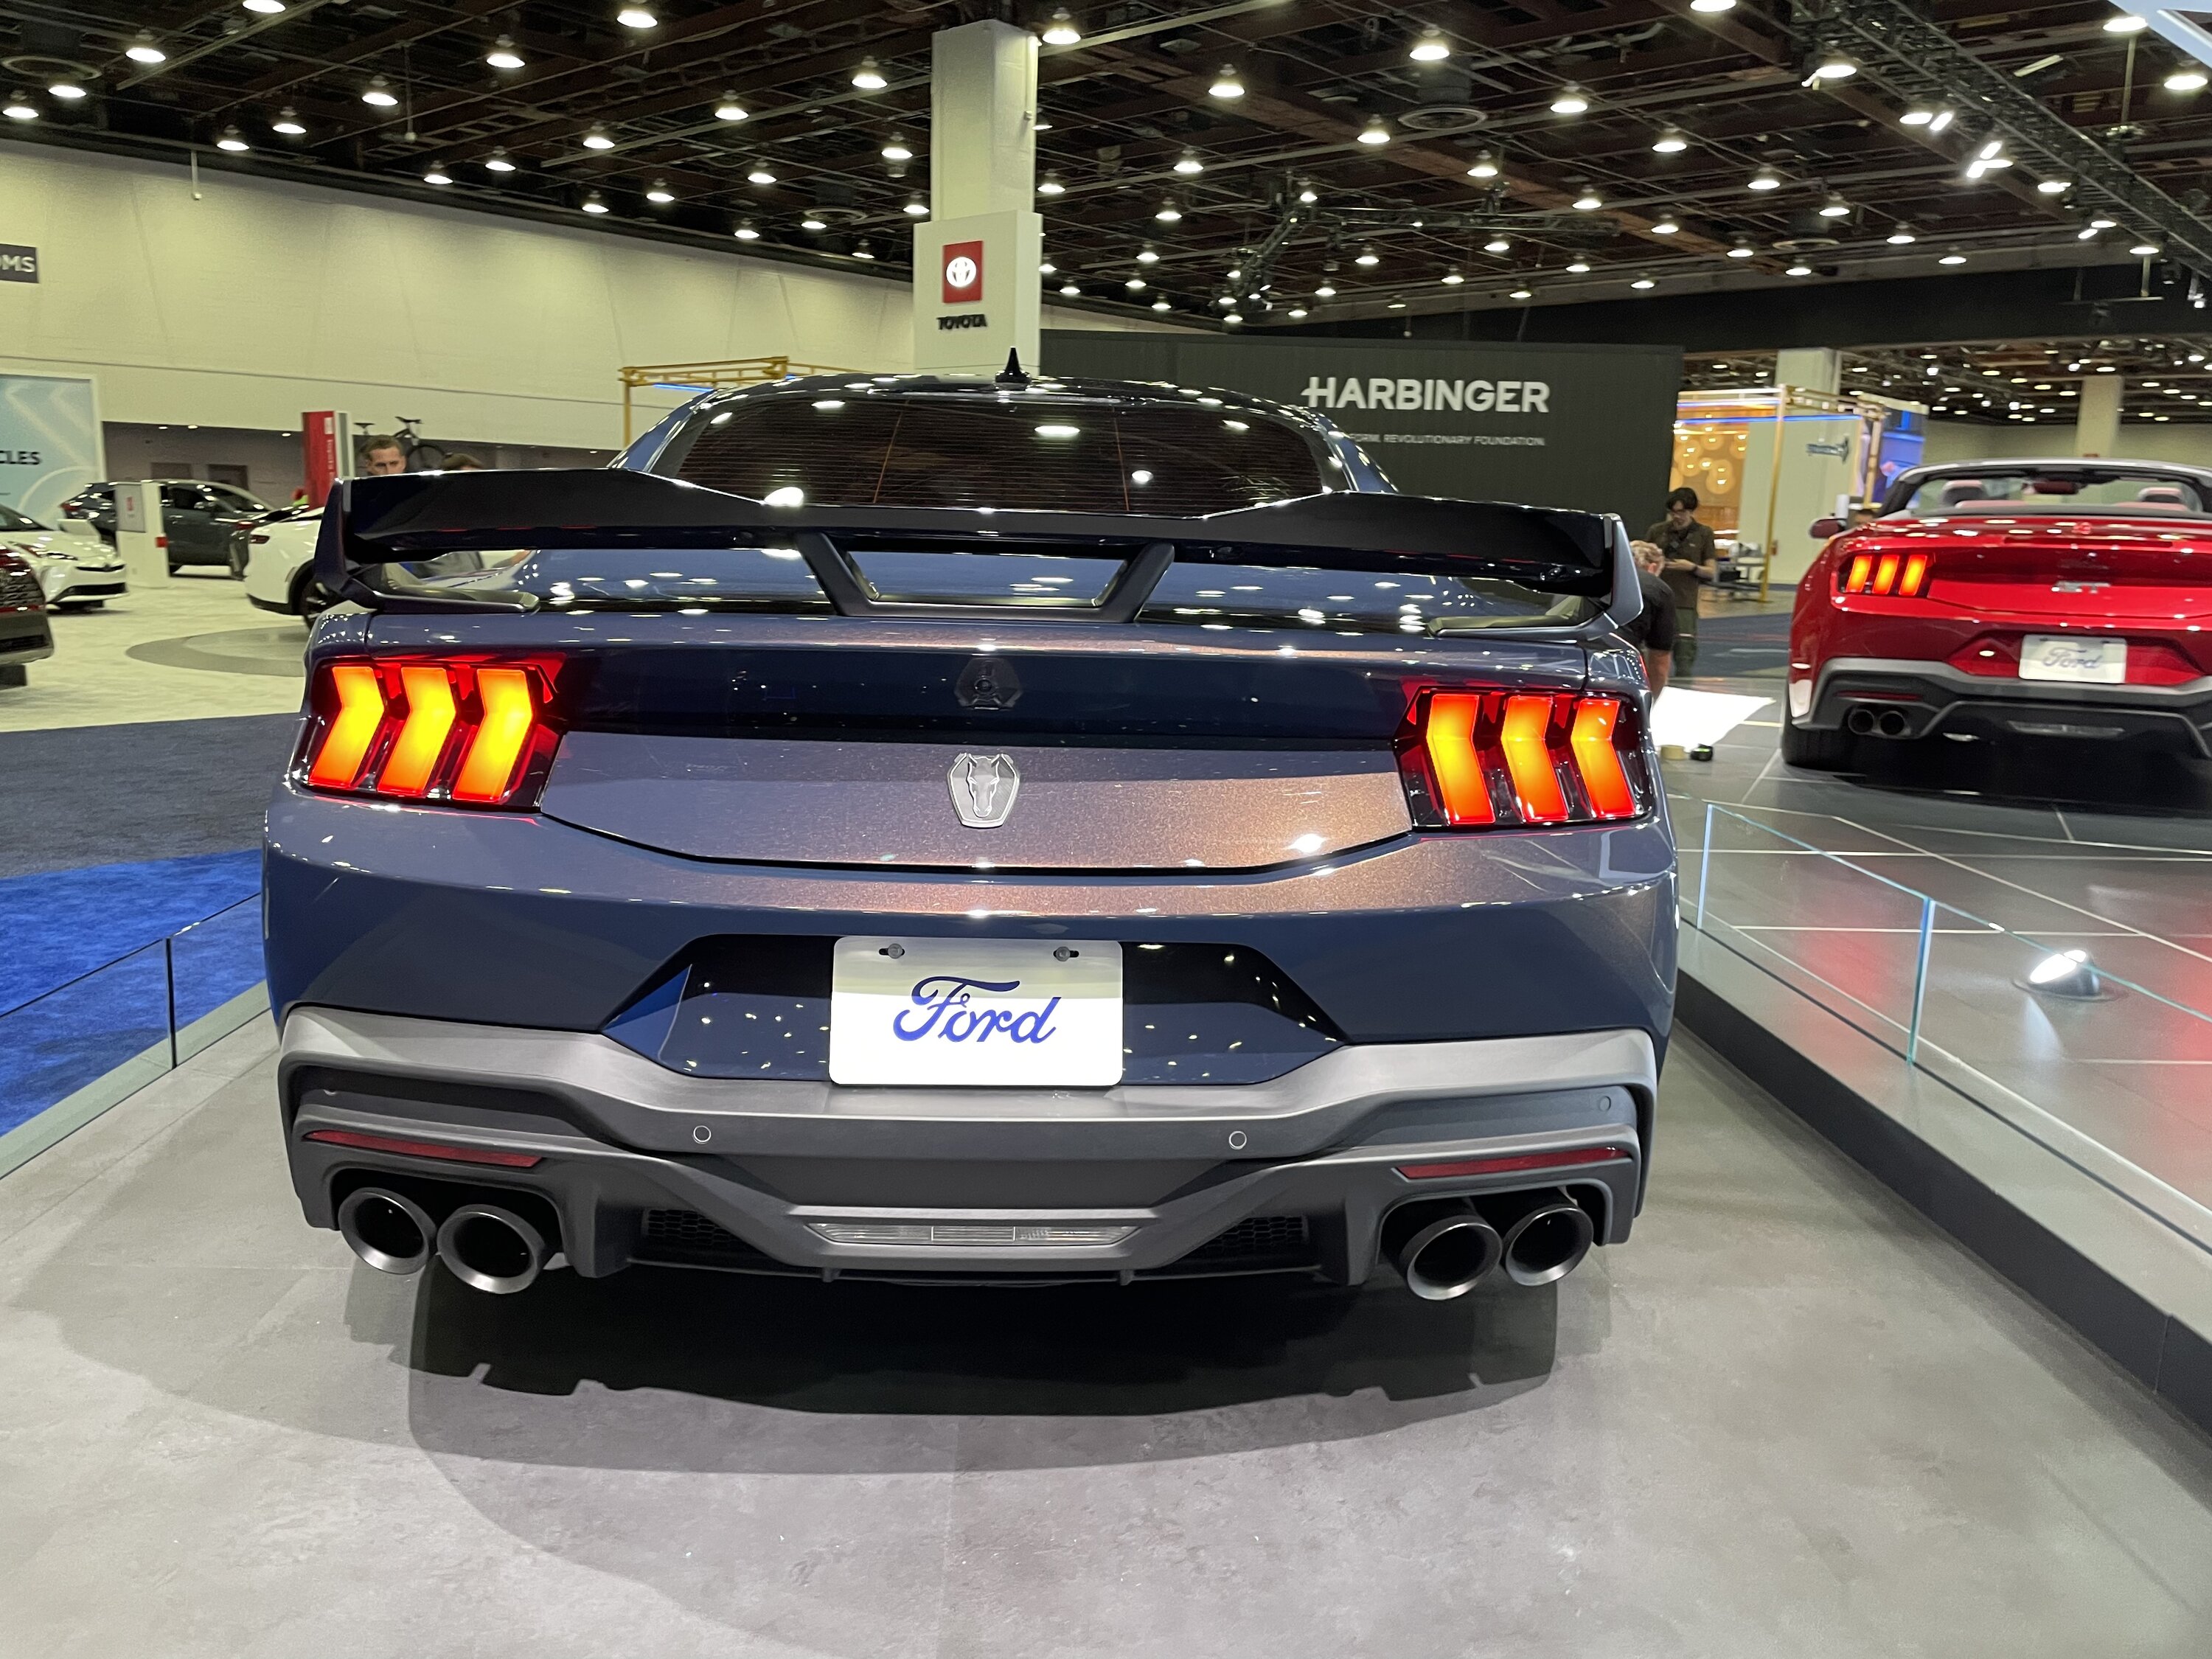 S650 Mustang Do you like the new rear lights on S650 Mustang? 9A89C108-C5D9-4B21-B2CD-28AC14E68EFD